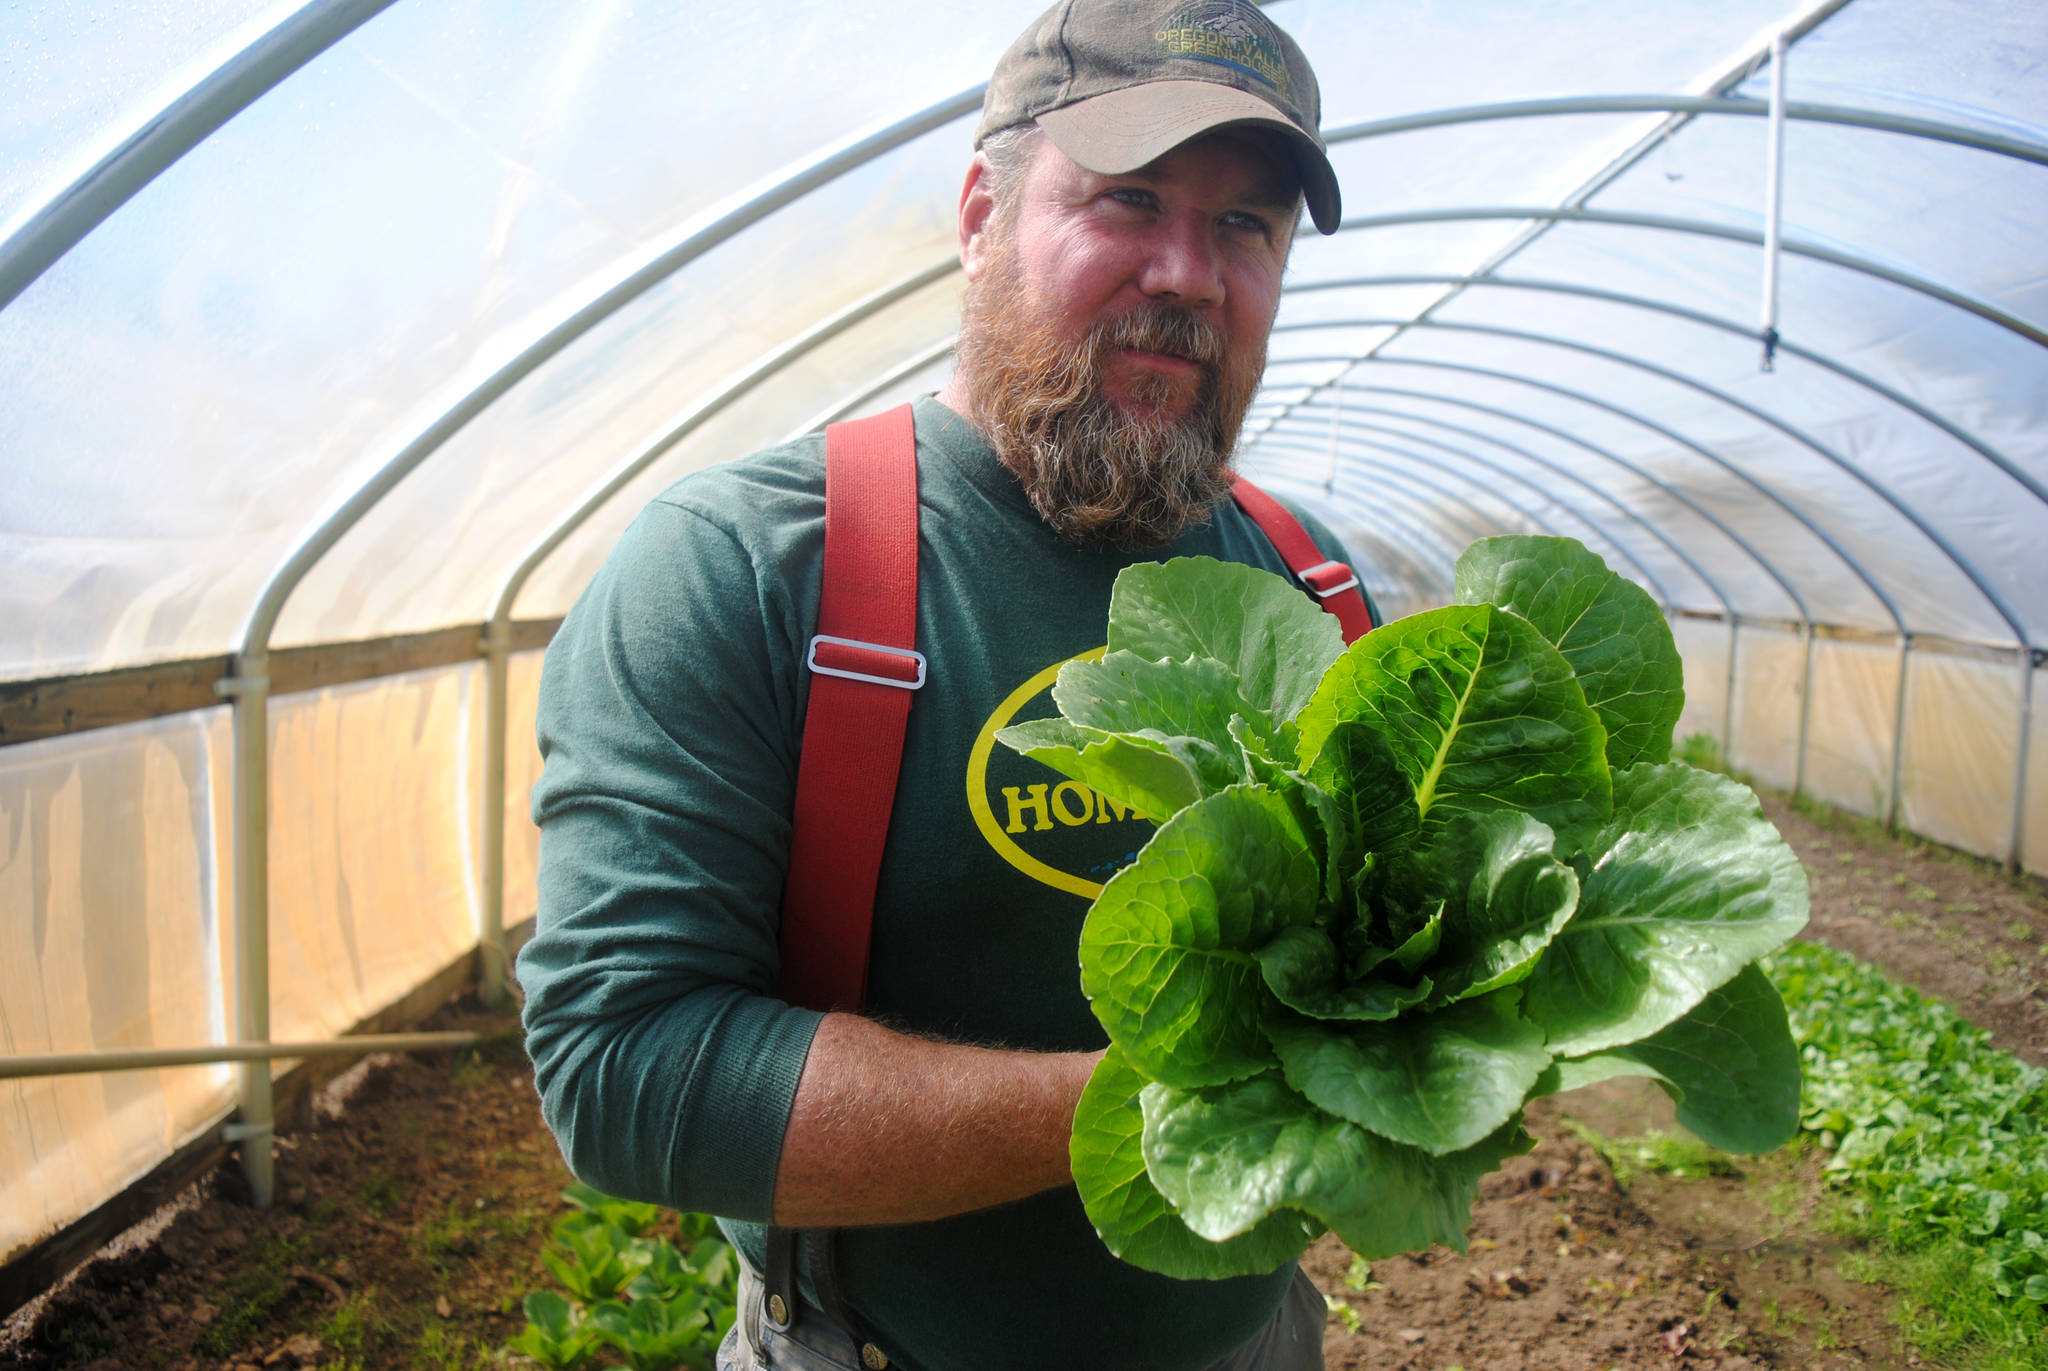 Both supply and demand are growing for local produce